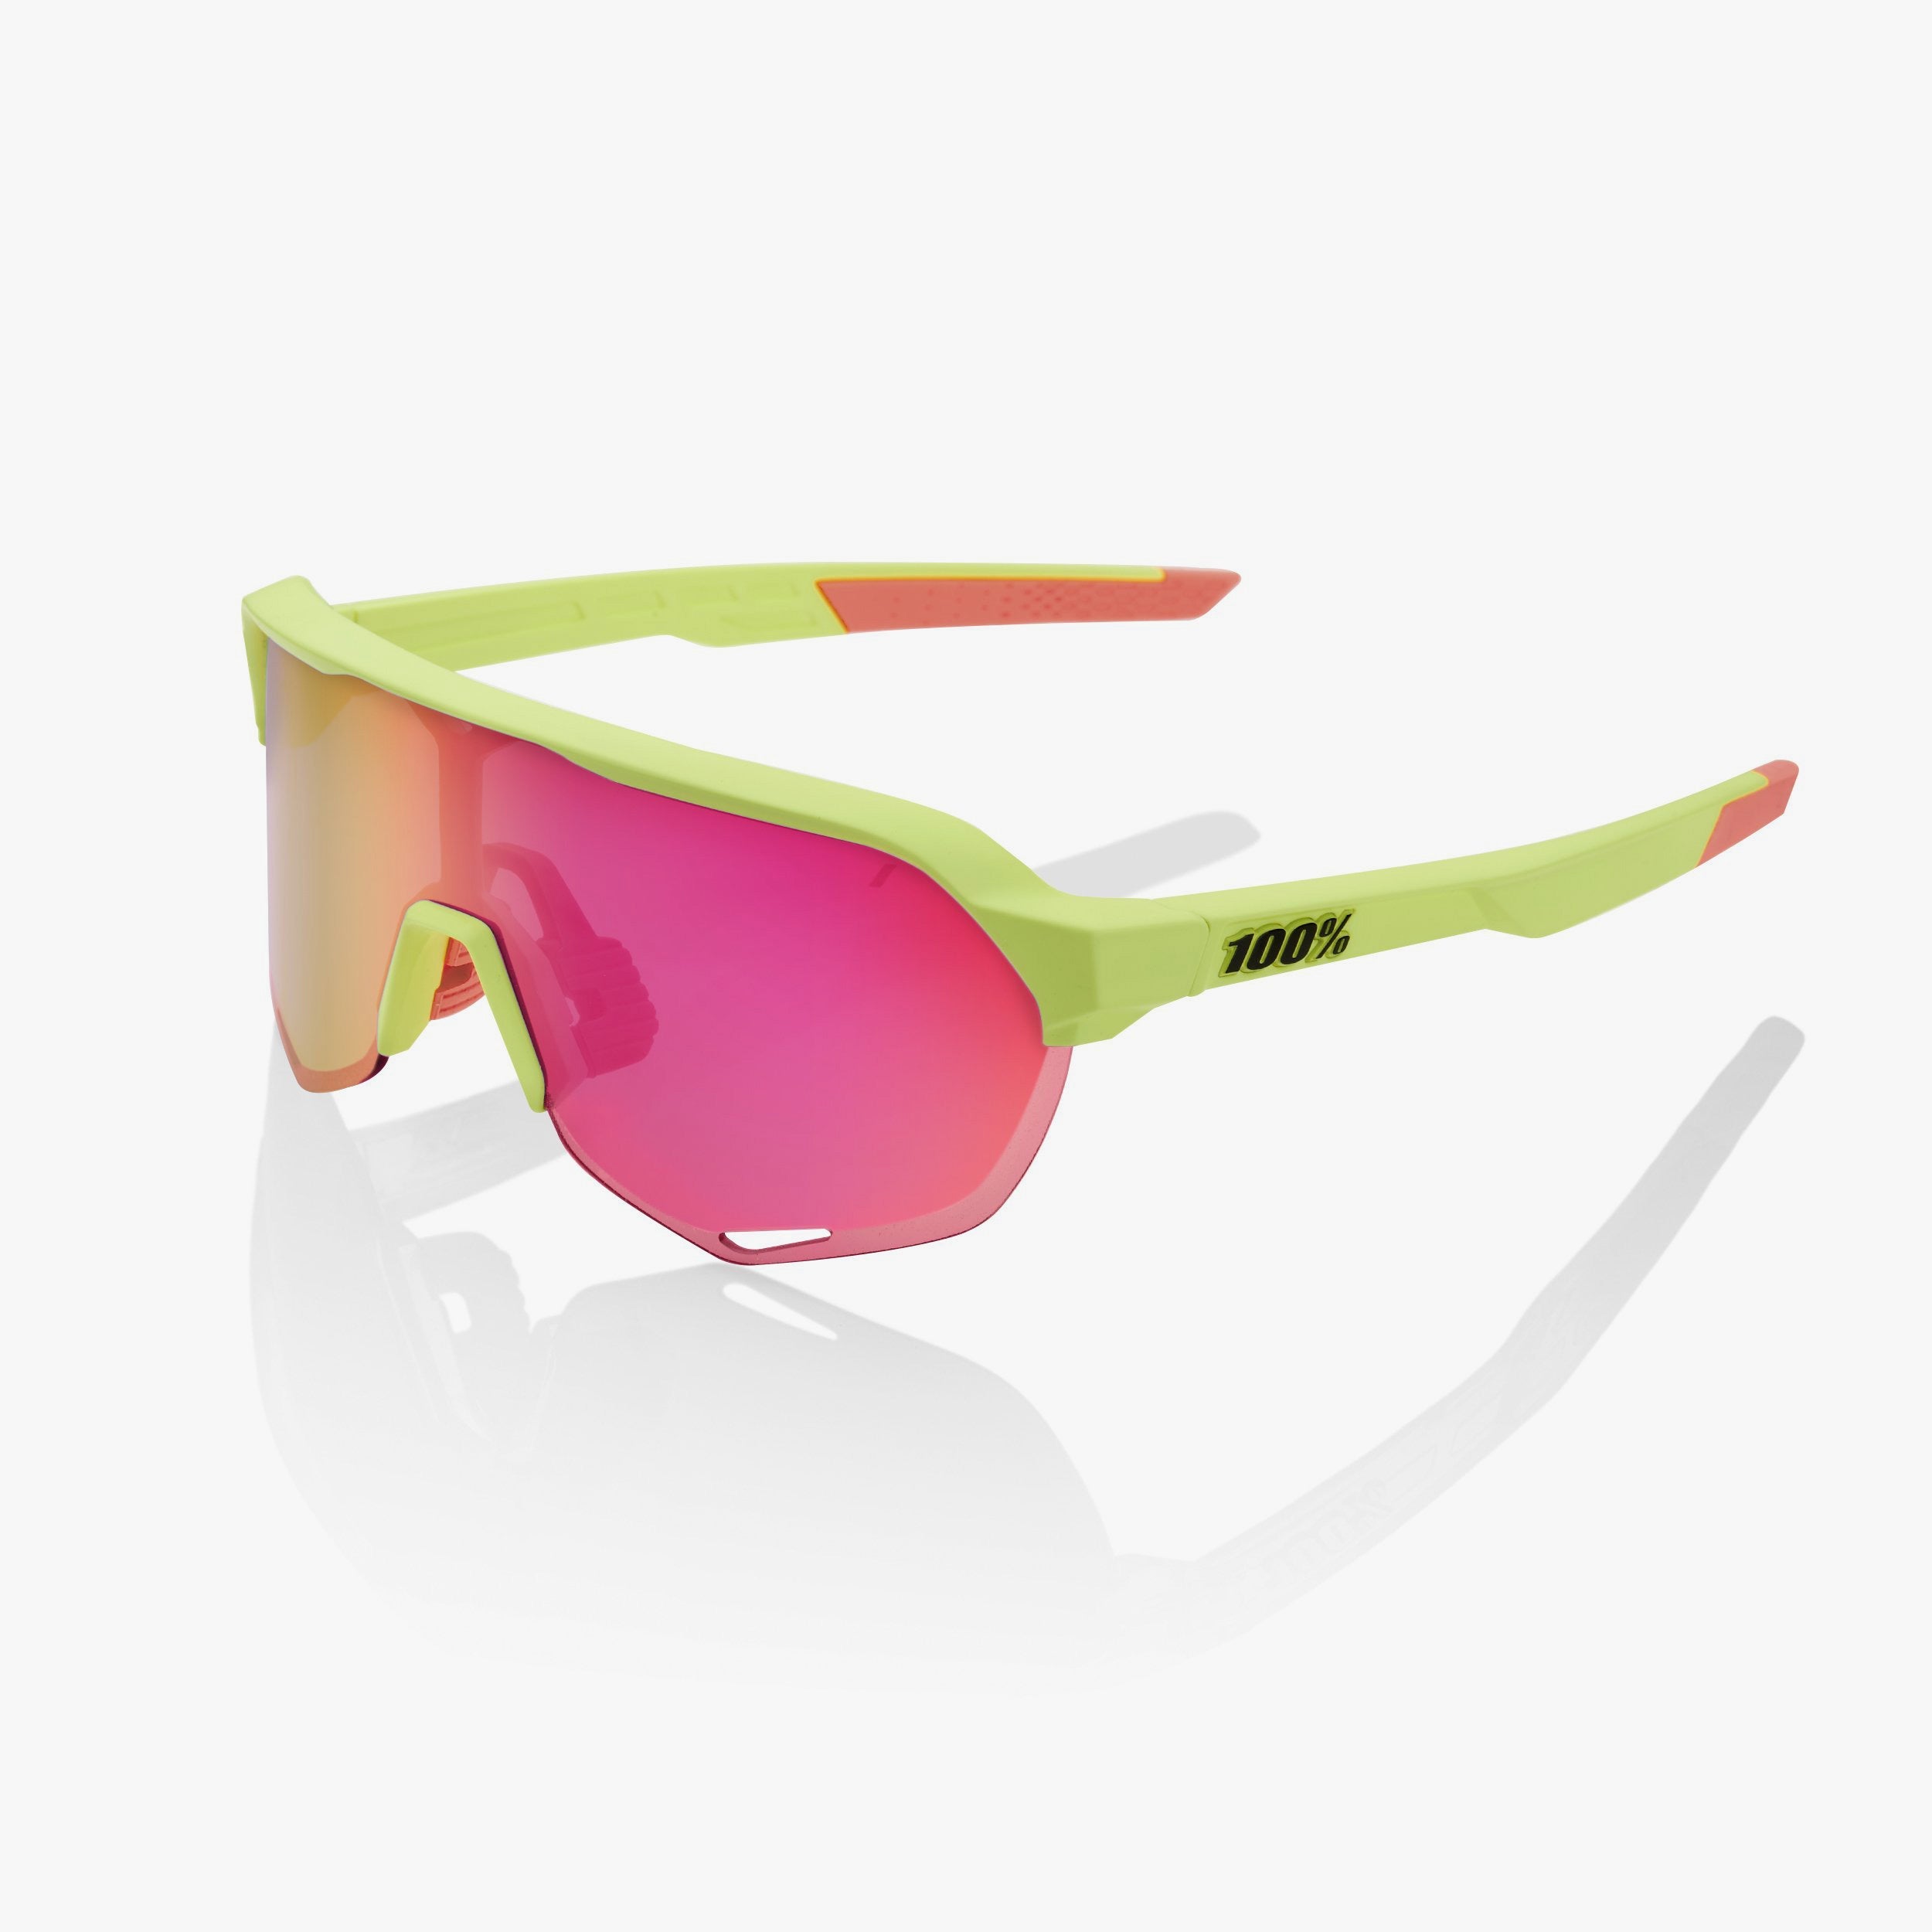 S2 - Matte Washed Out Neon Yellow - Purple Multilayer Mirror Lens